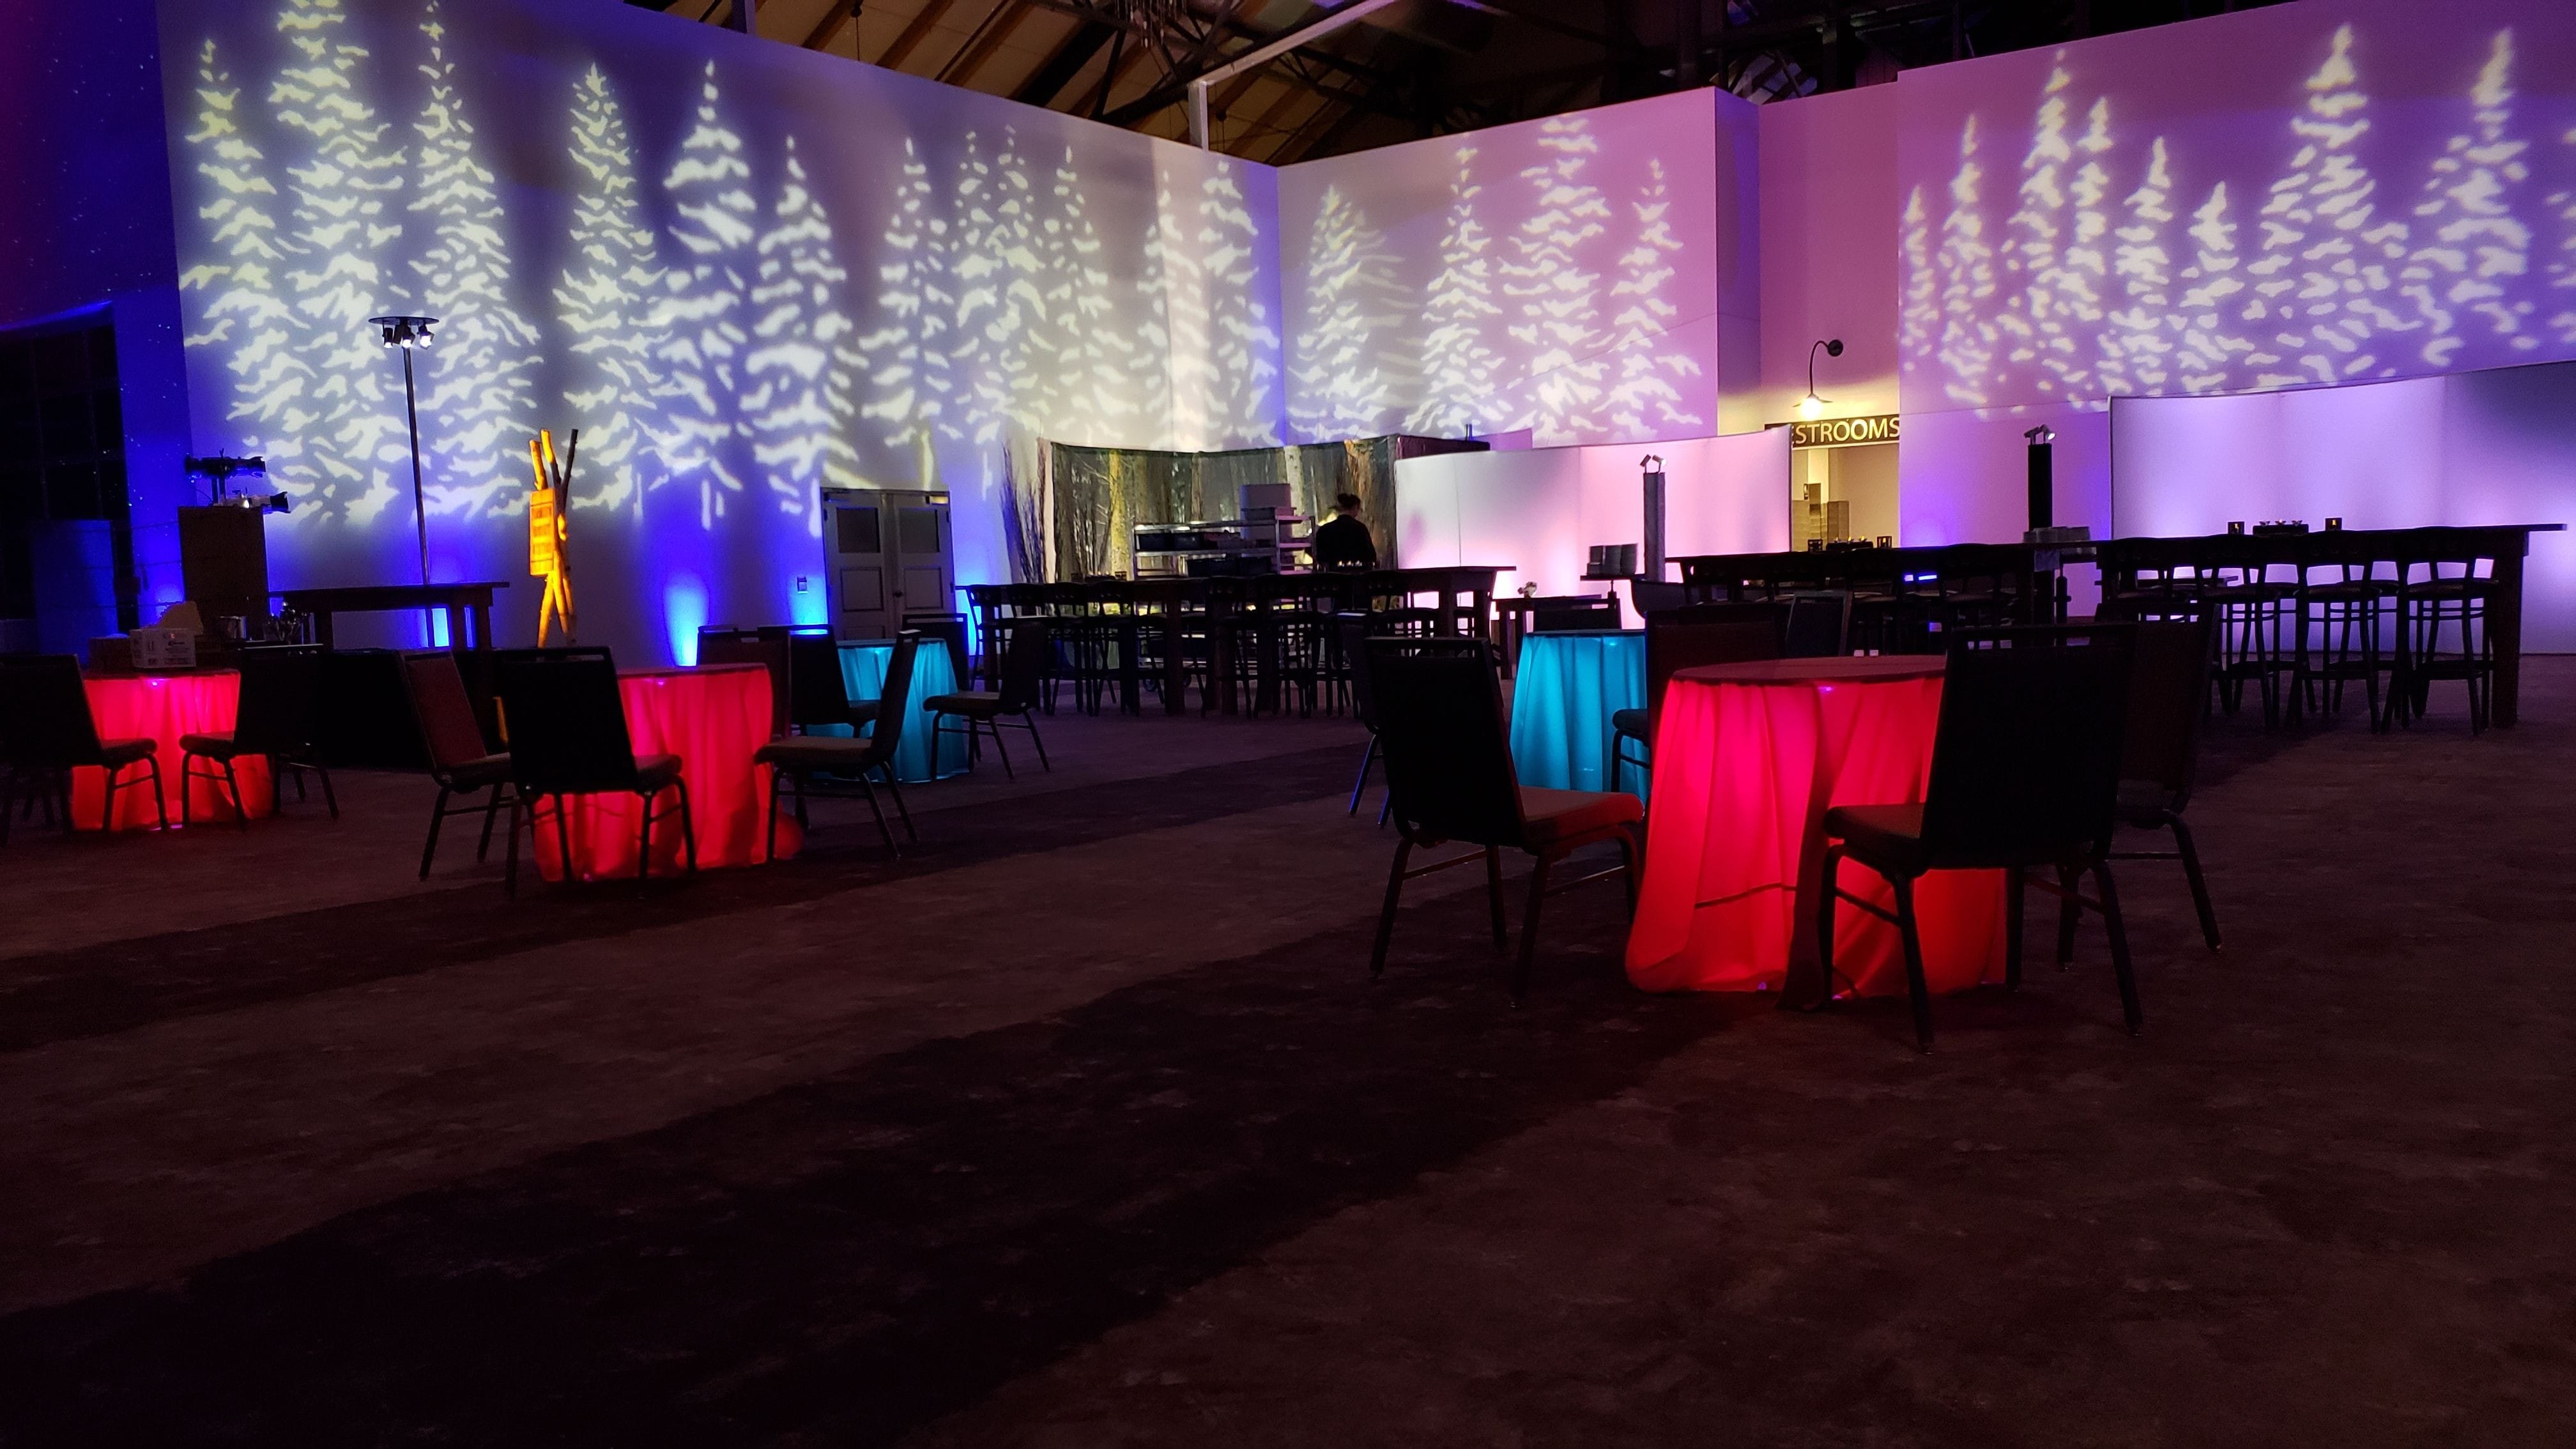 Northern Lights Themed party with tree gobos, glowing cocktail tables, and Stars and Northern Lights on the ceiling. Duluth Event Lighting